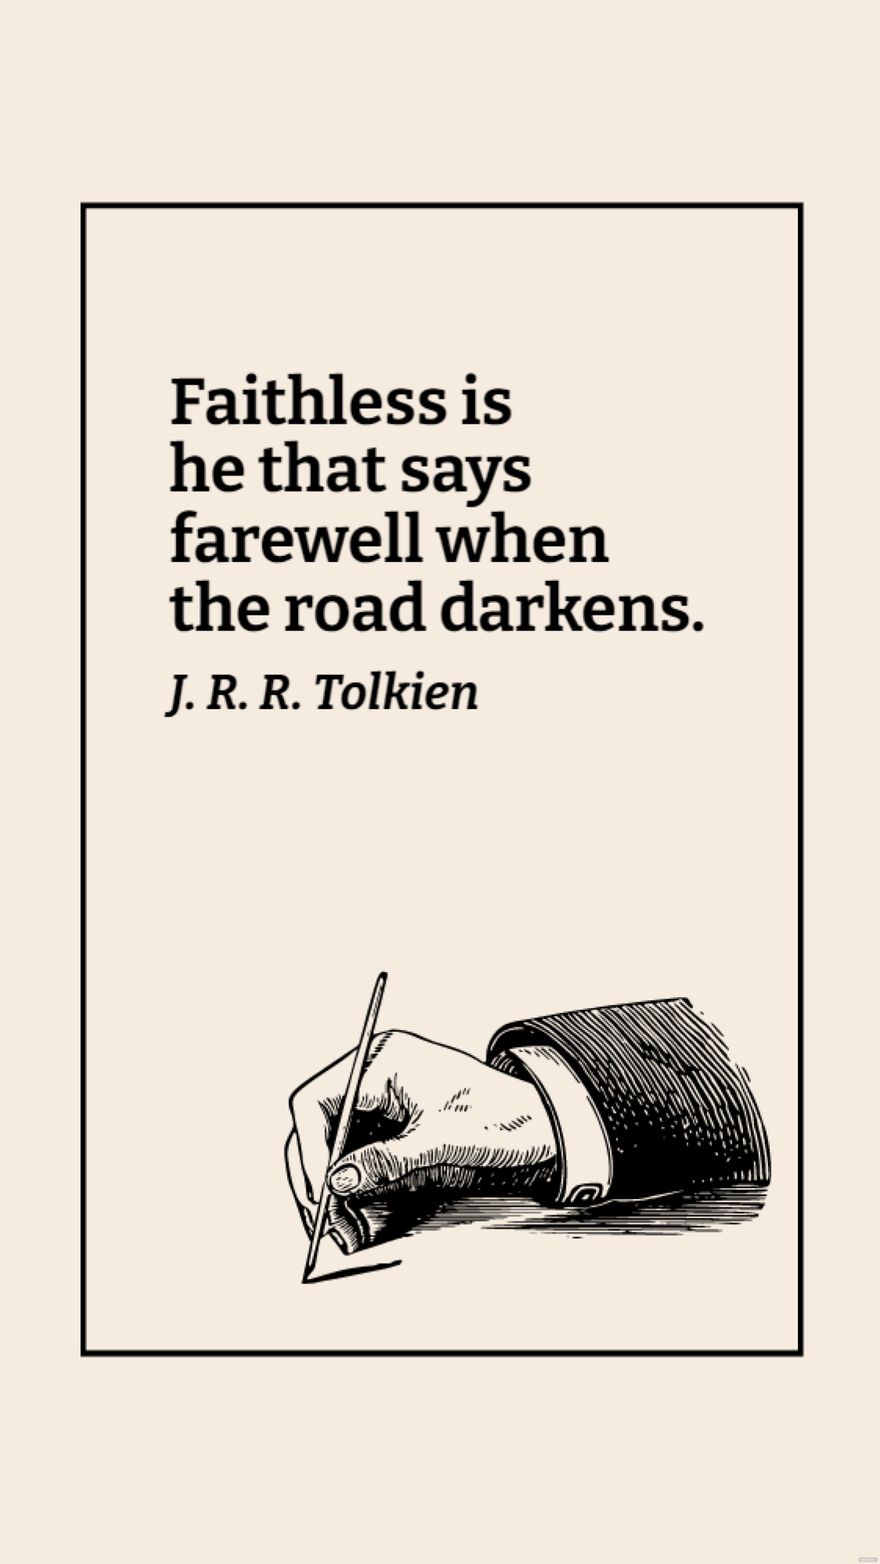 Free J. R. R. Tolkien - Faithless is he that says farewell when the road darkens. in JPG